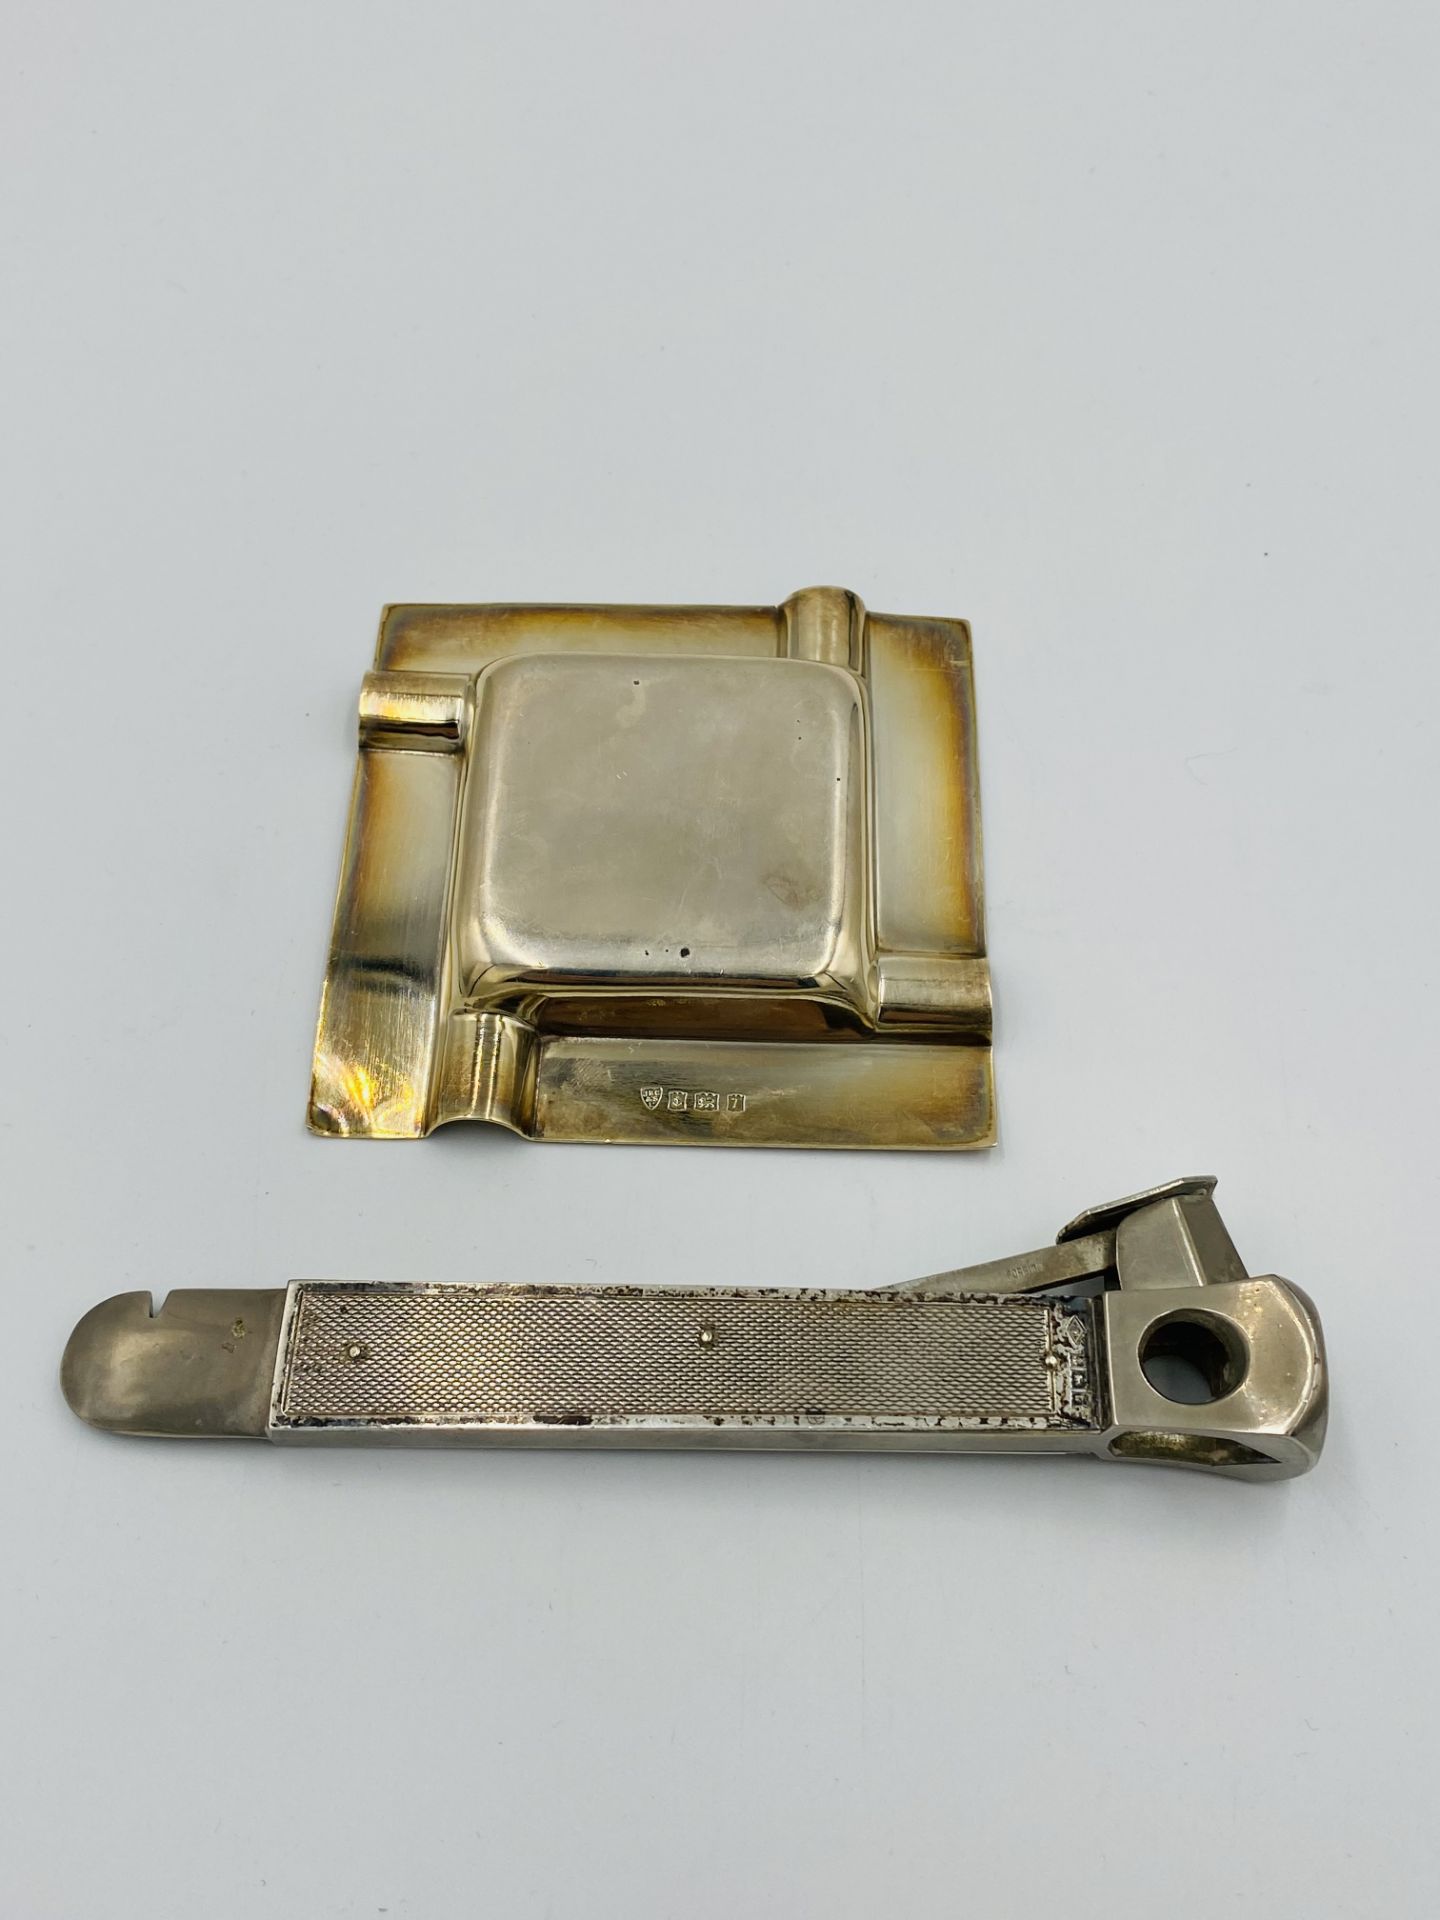 Silver ashtray and cigar cutter with silver gripped handle - Image 3 of 3